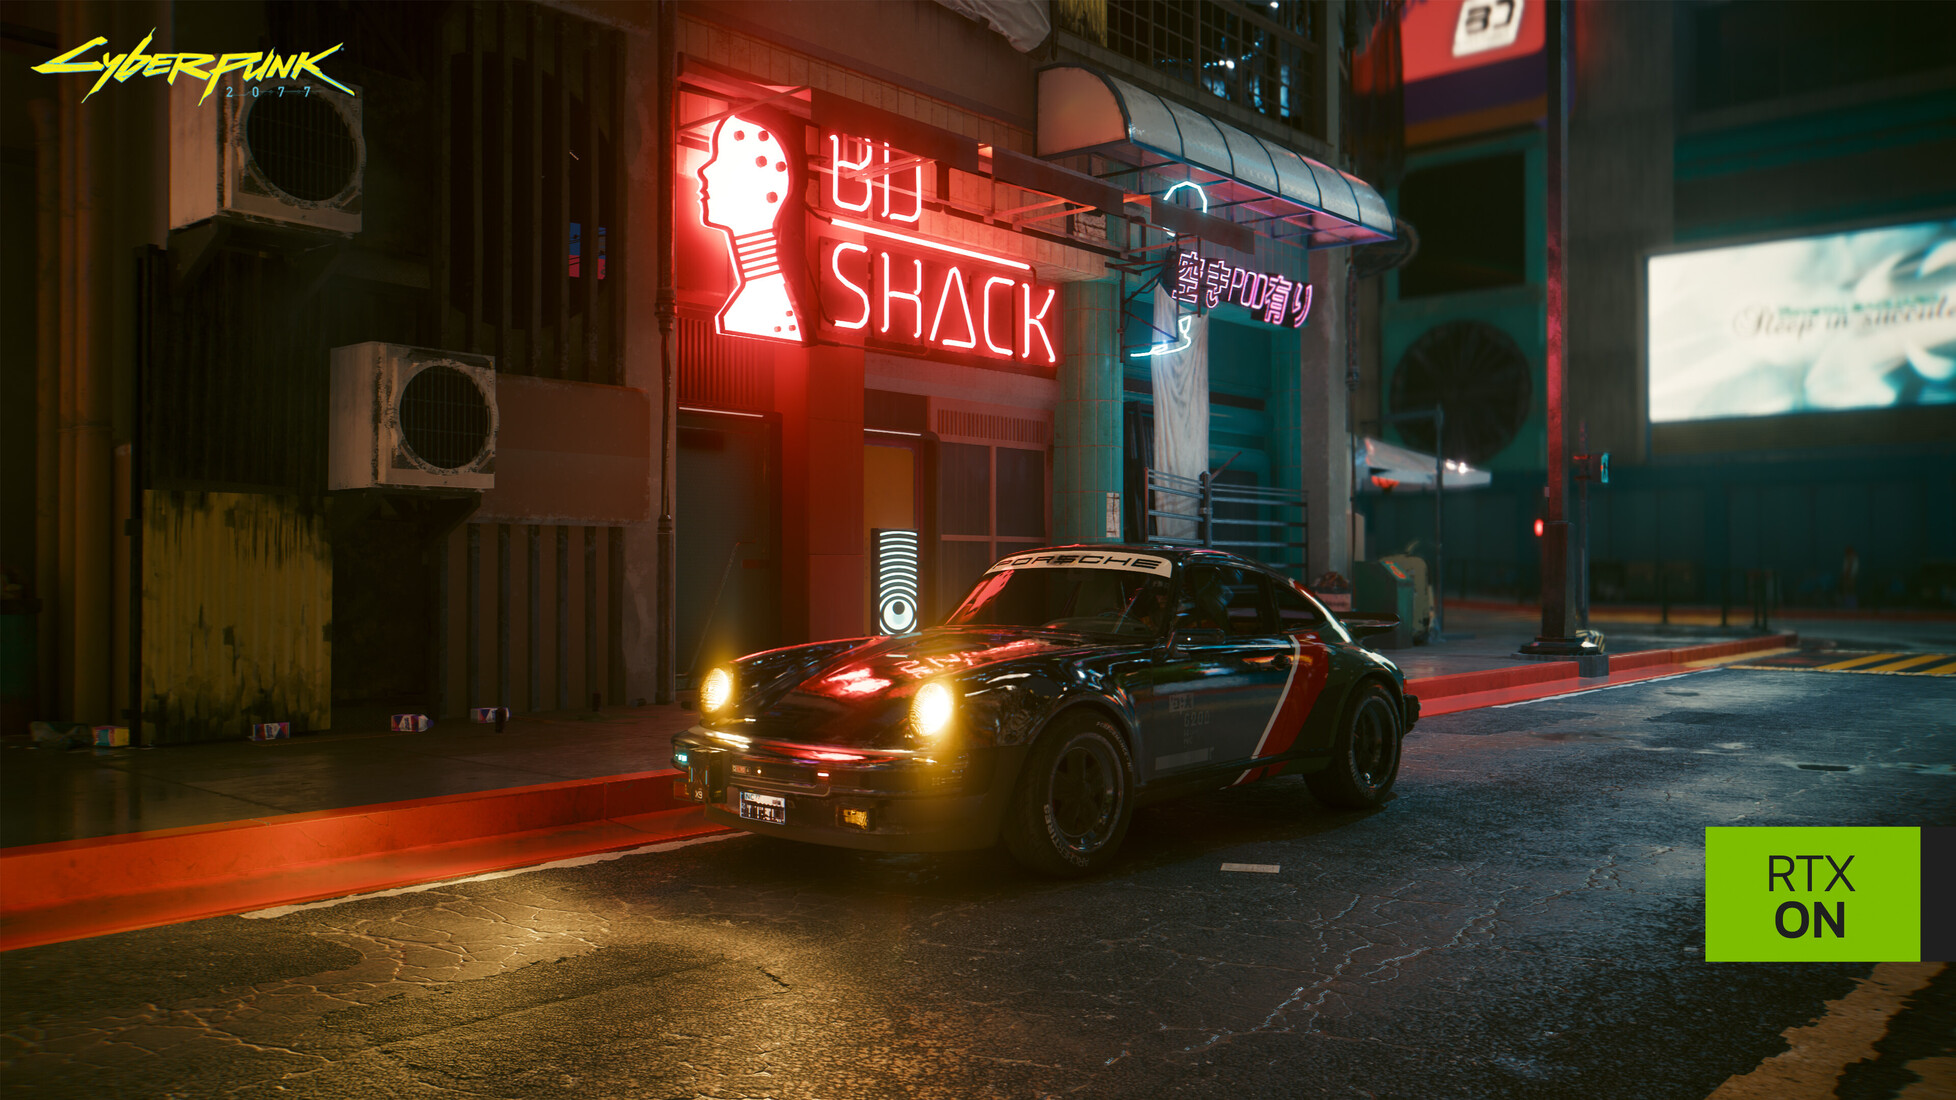 Here Are Cyberpunk 2077's Overdrive Ray Tracing Minimum Specs, 19 GB Update  Live Now